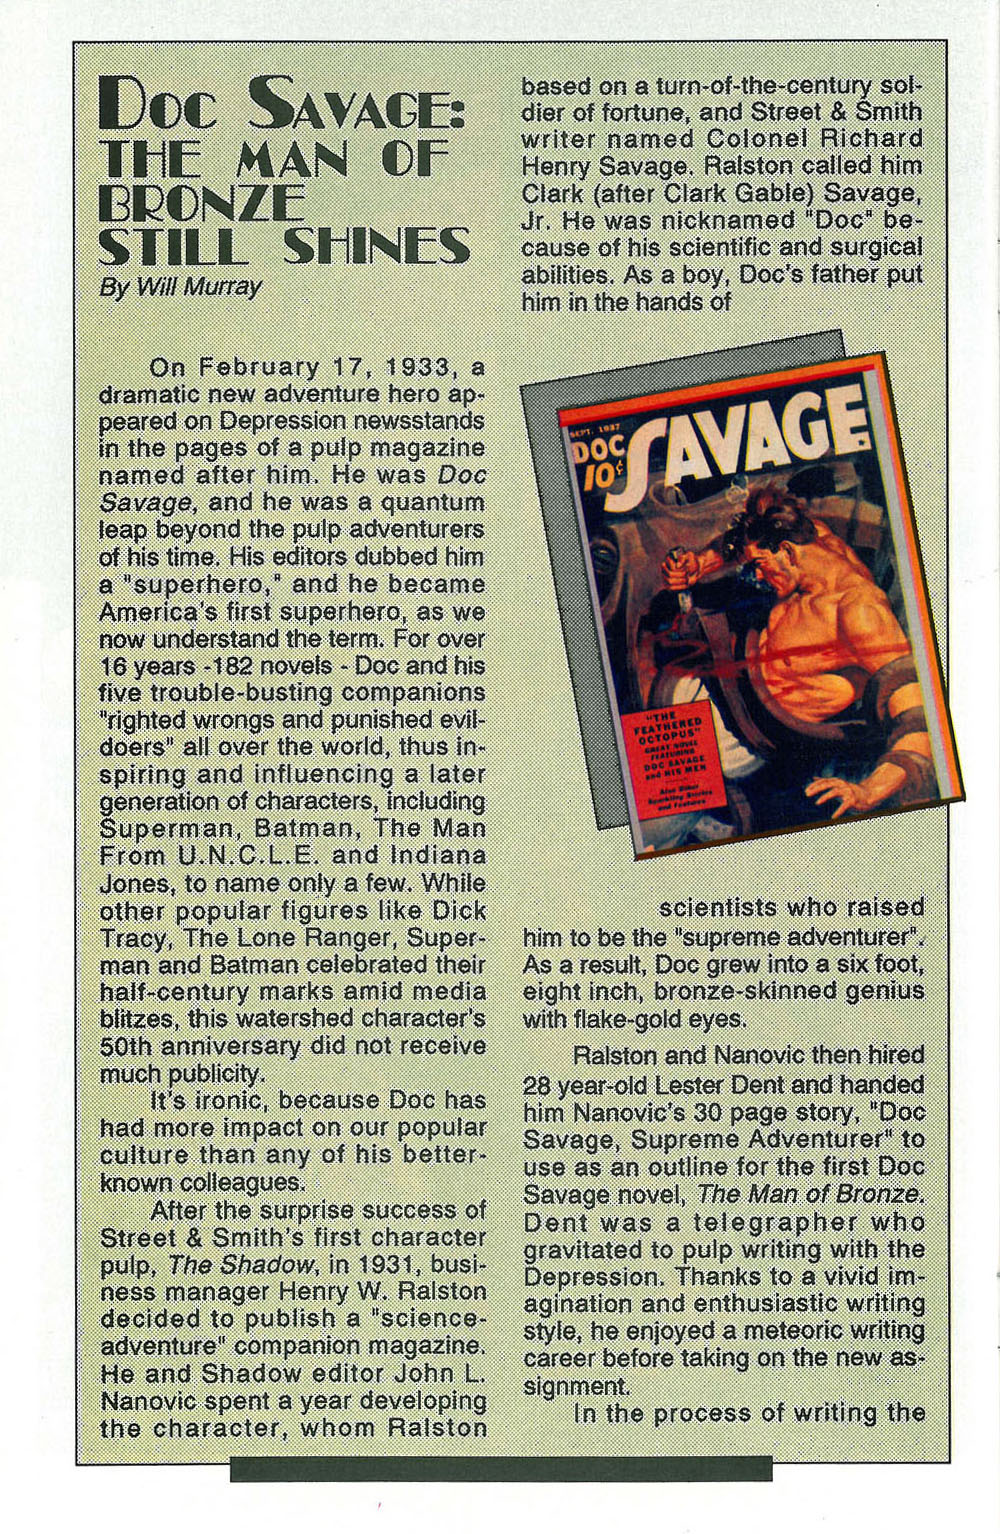 Read online Doc Savage: The Man of Bronze comic -  Issue #1 - 30